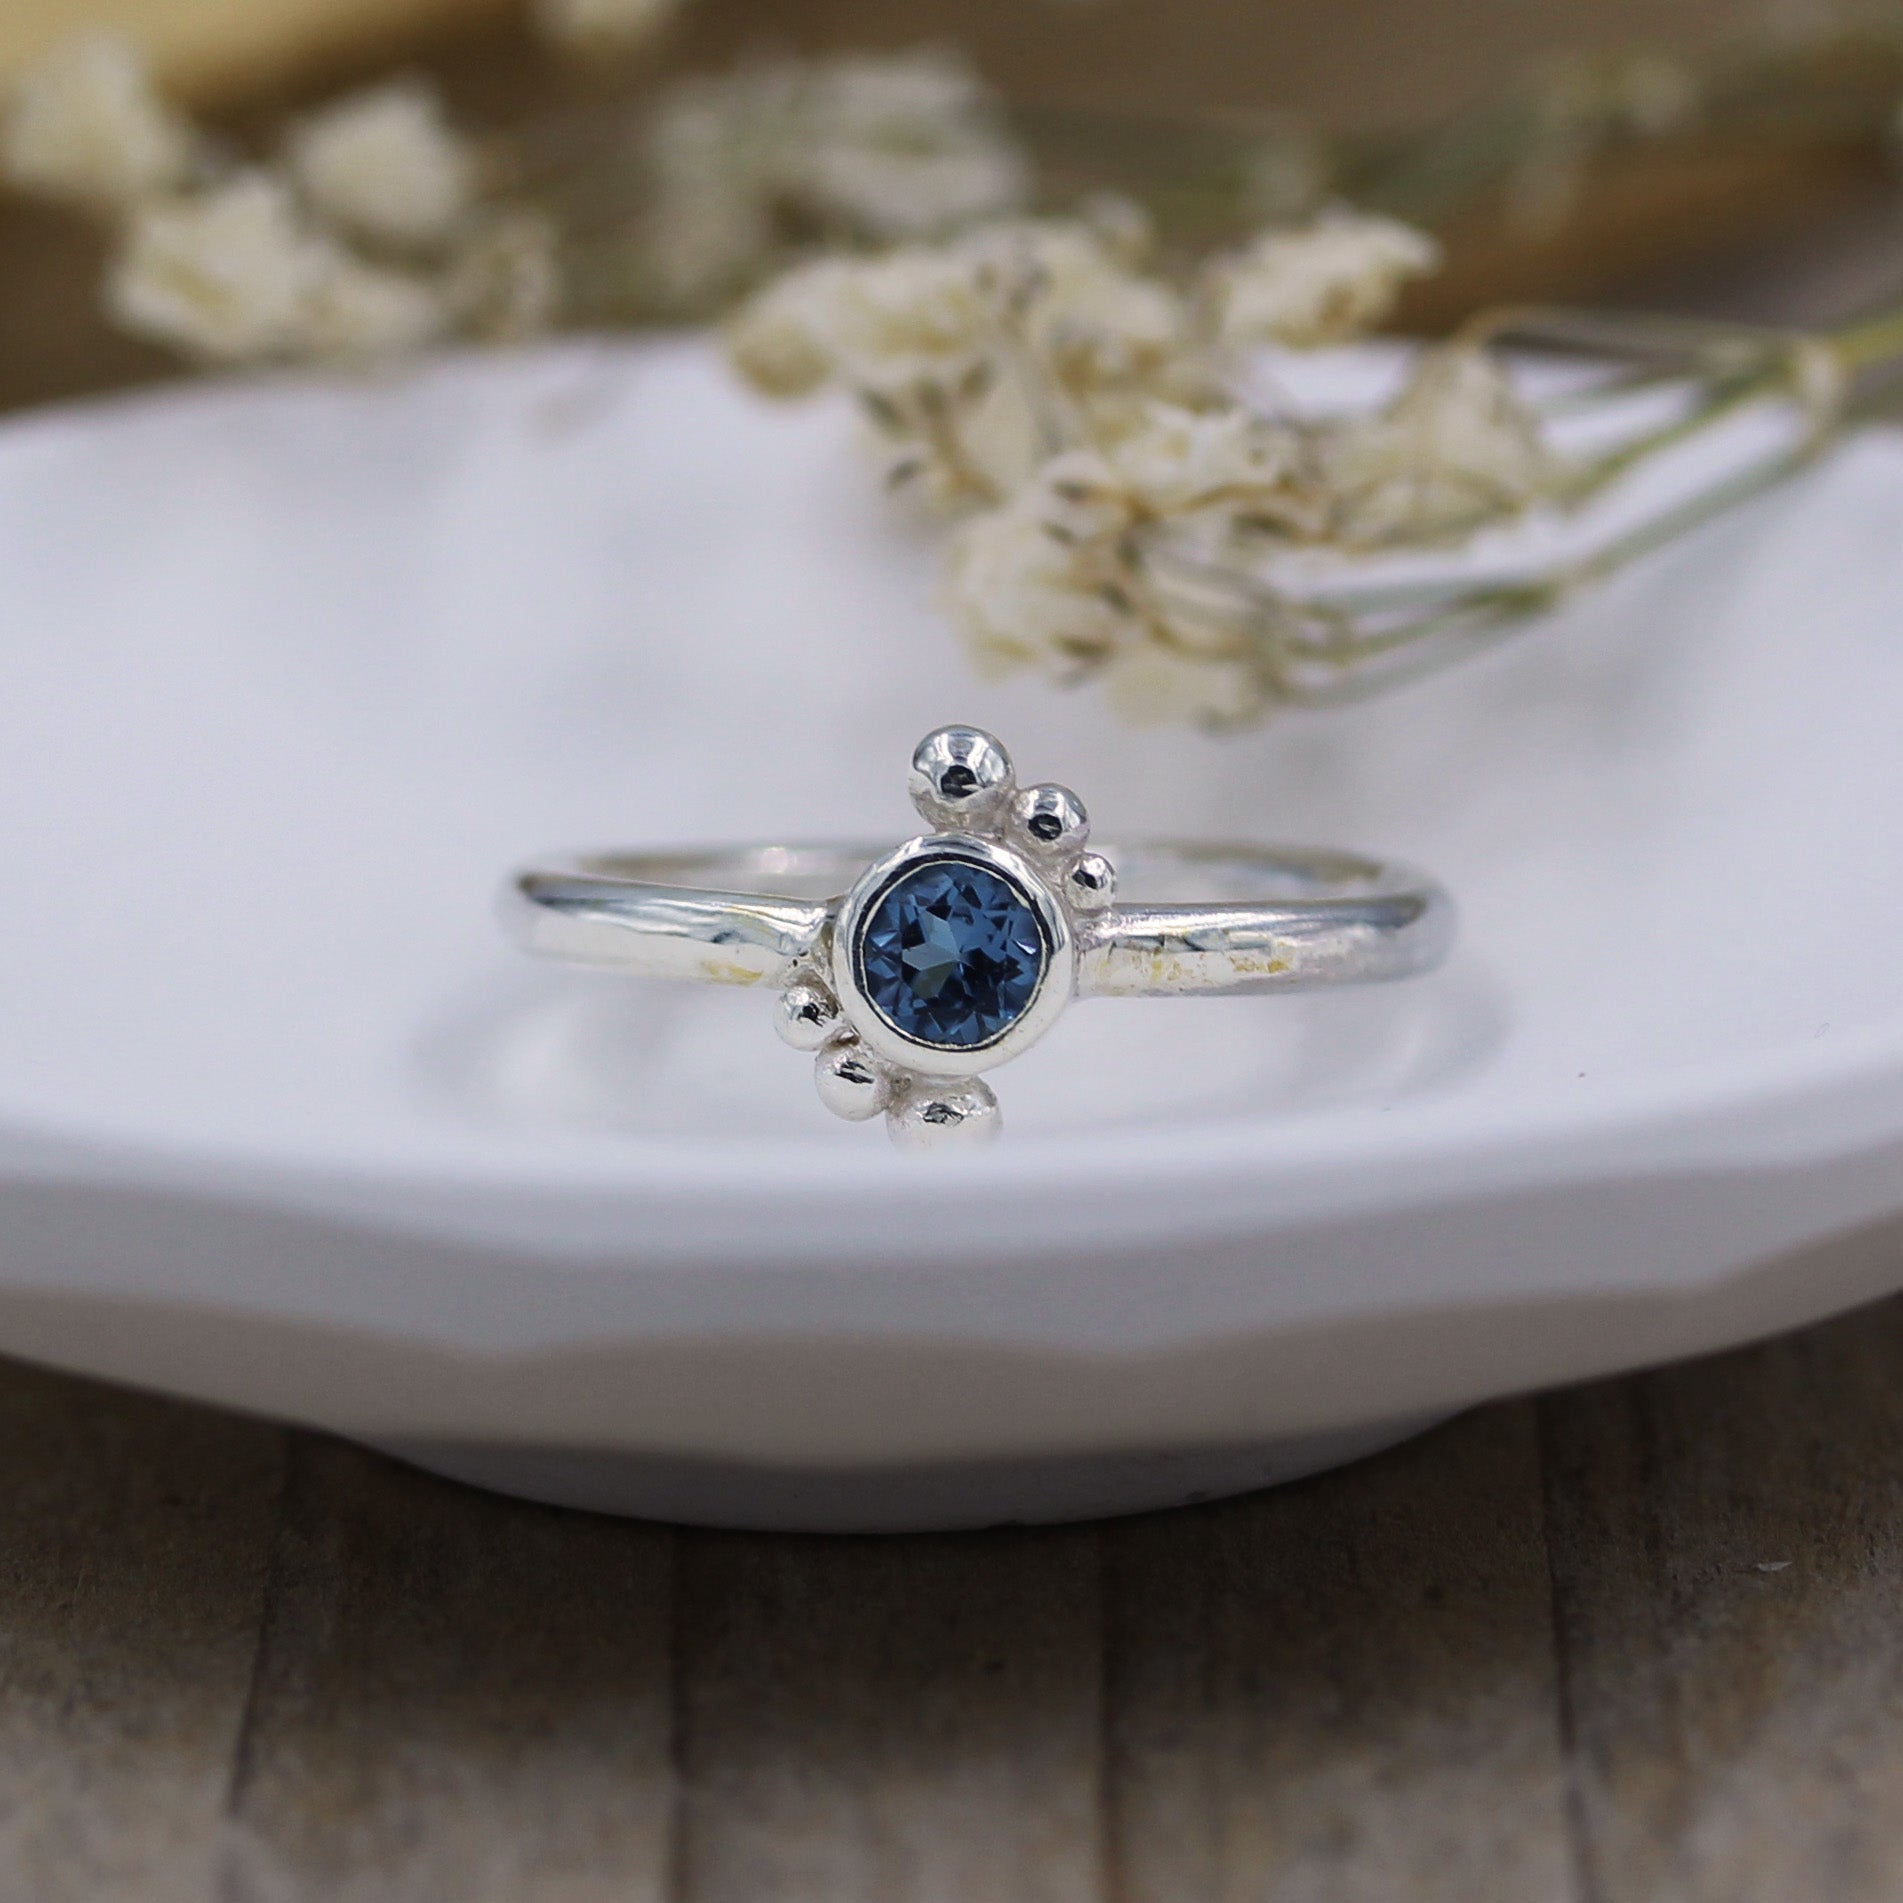 Sea inspired ring, handmade with 100% recycled silver and London Blue Topaz